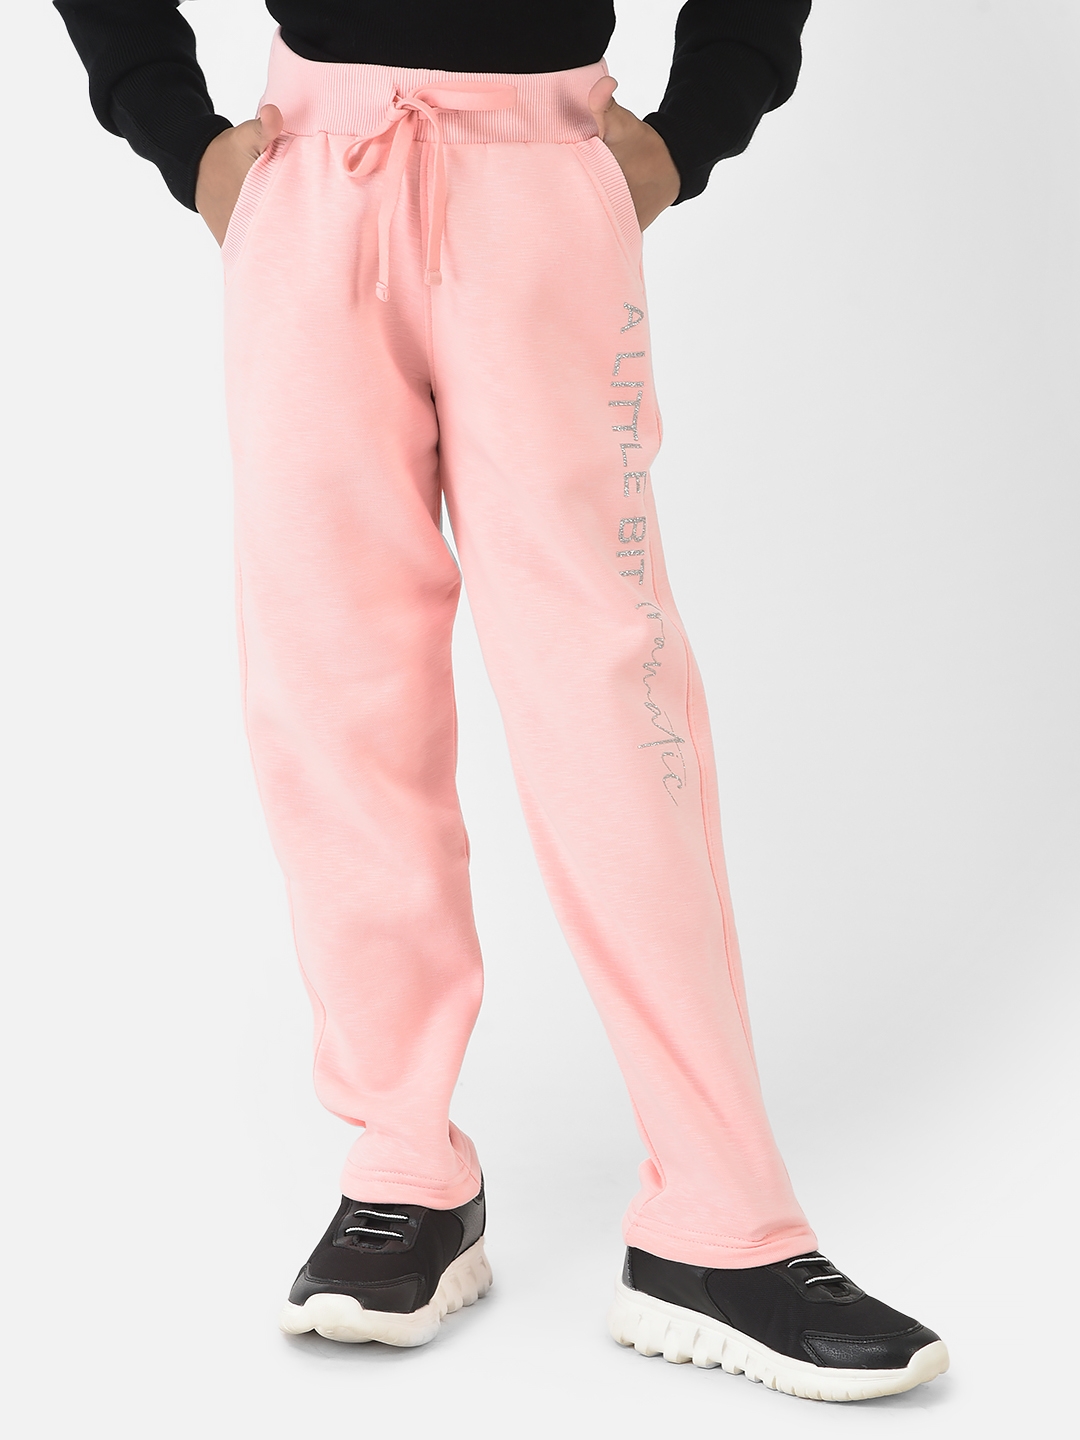 Crimsoune Club Girls Baby Pink Track Pants with Typographic Detailing 